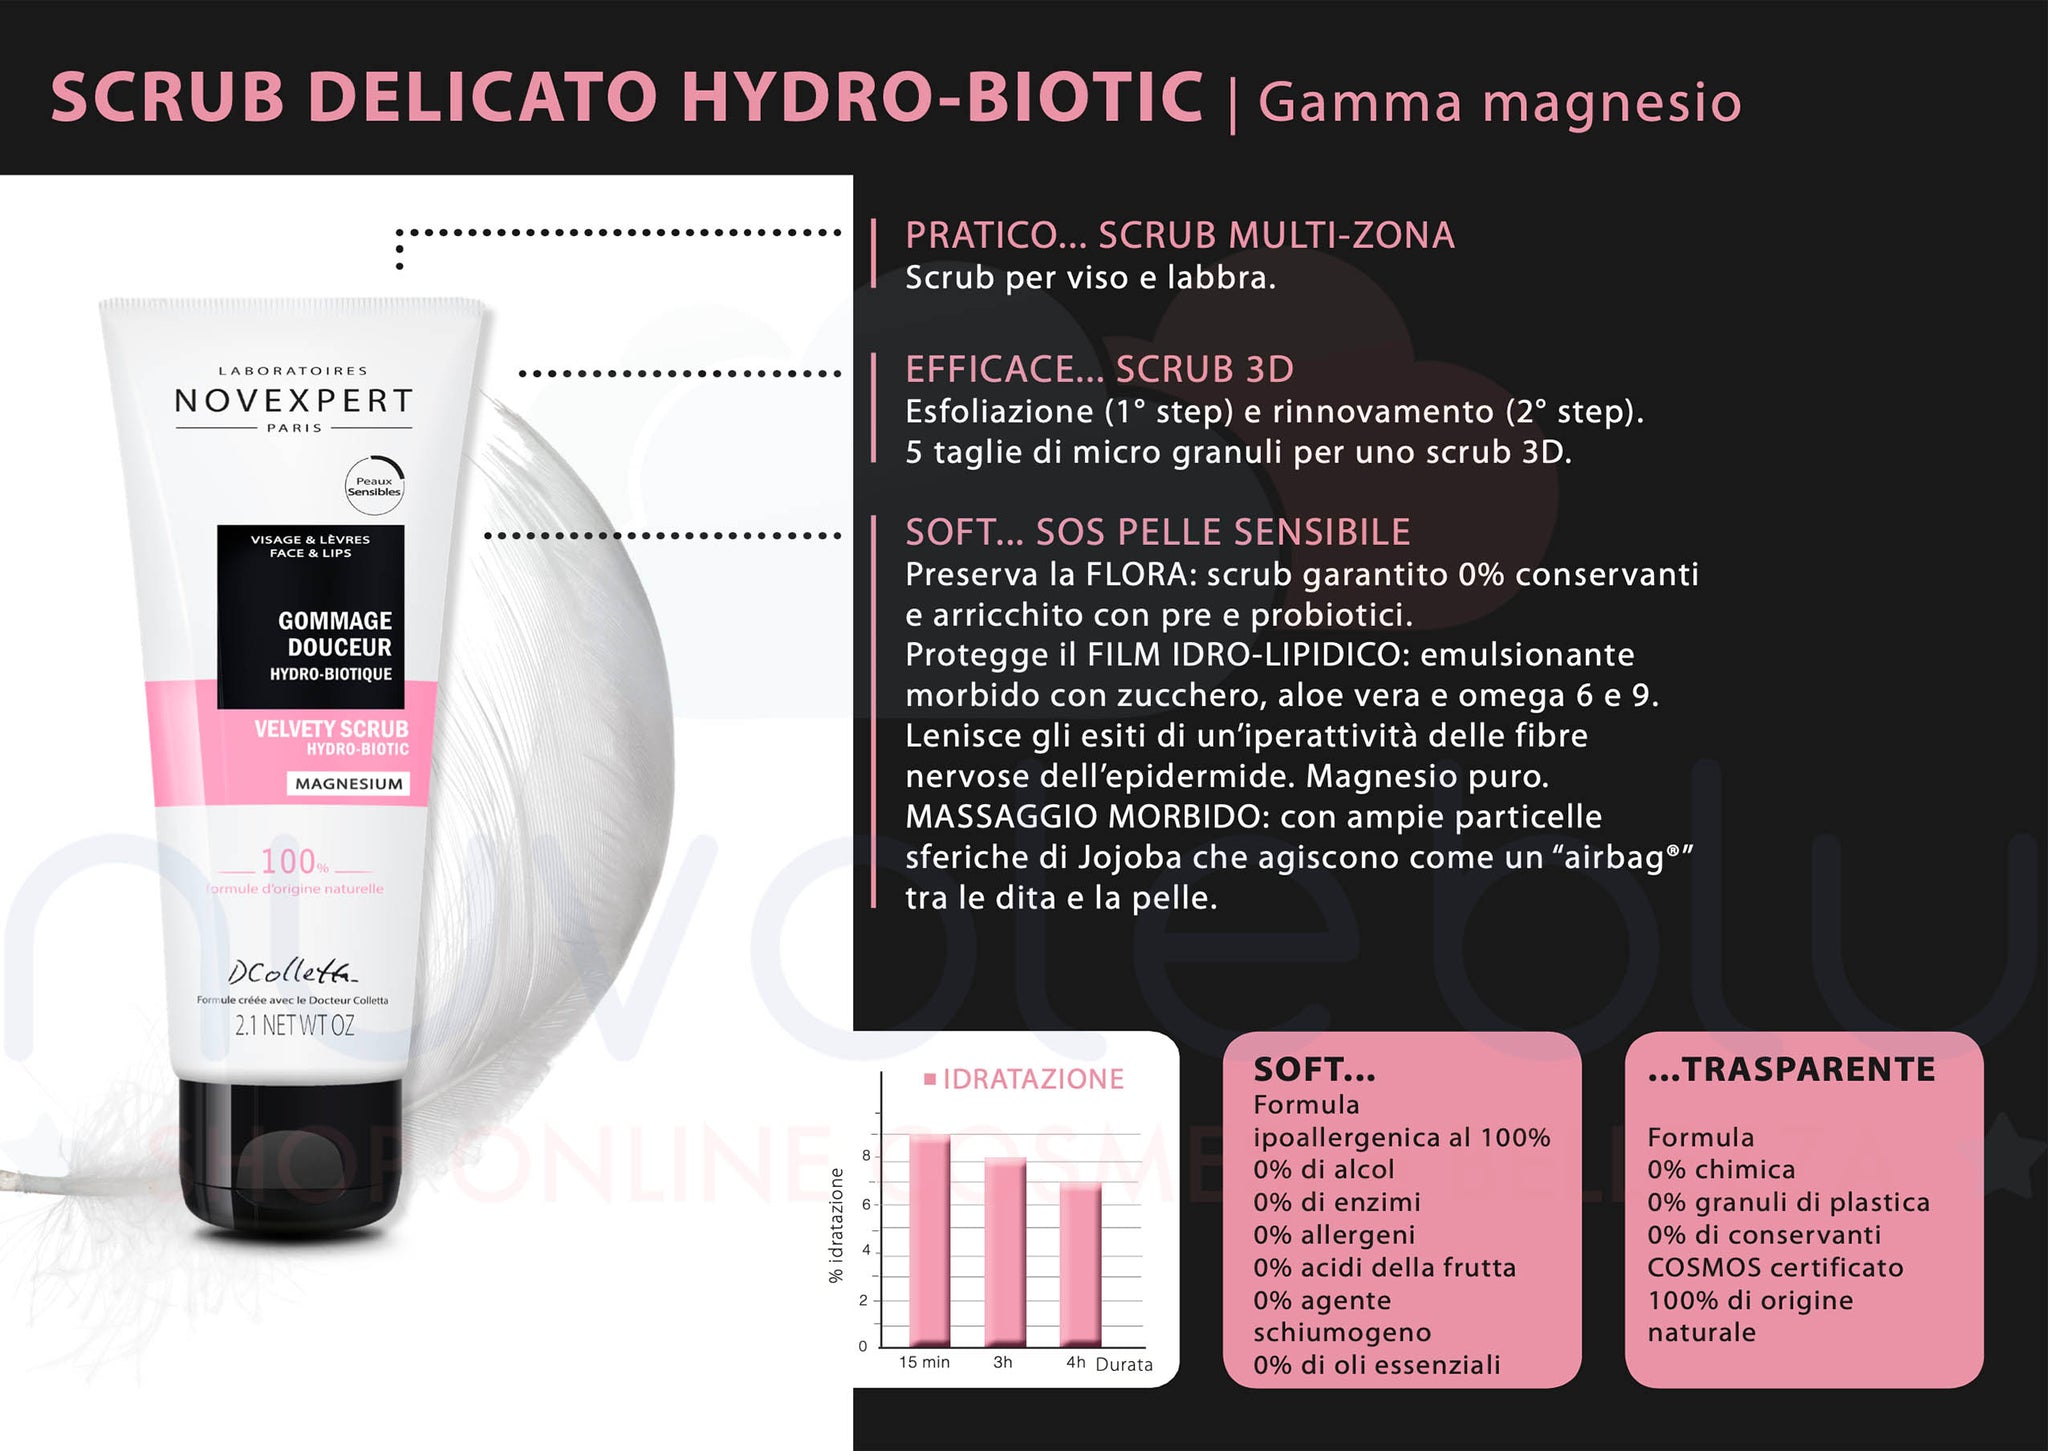 Magnesium - Gommage Dolce Hydro-Biotique Novexpert